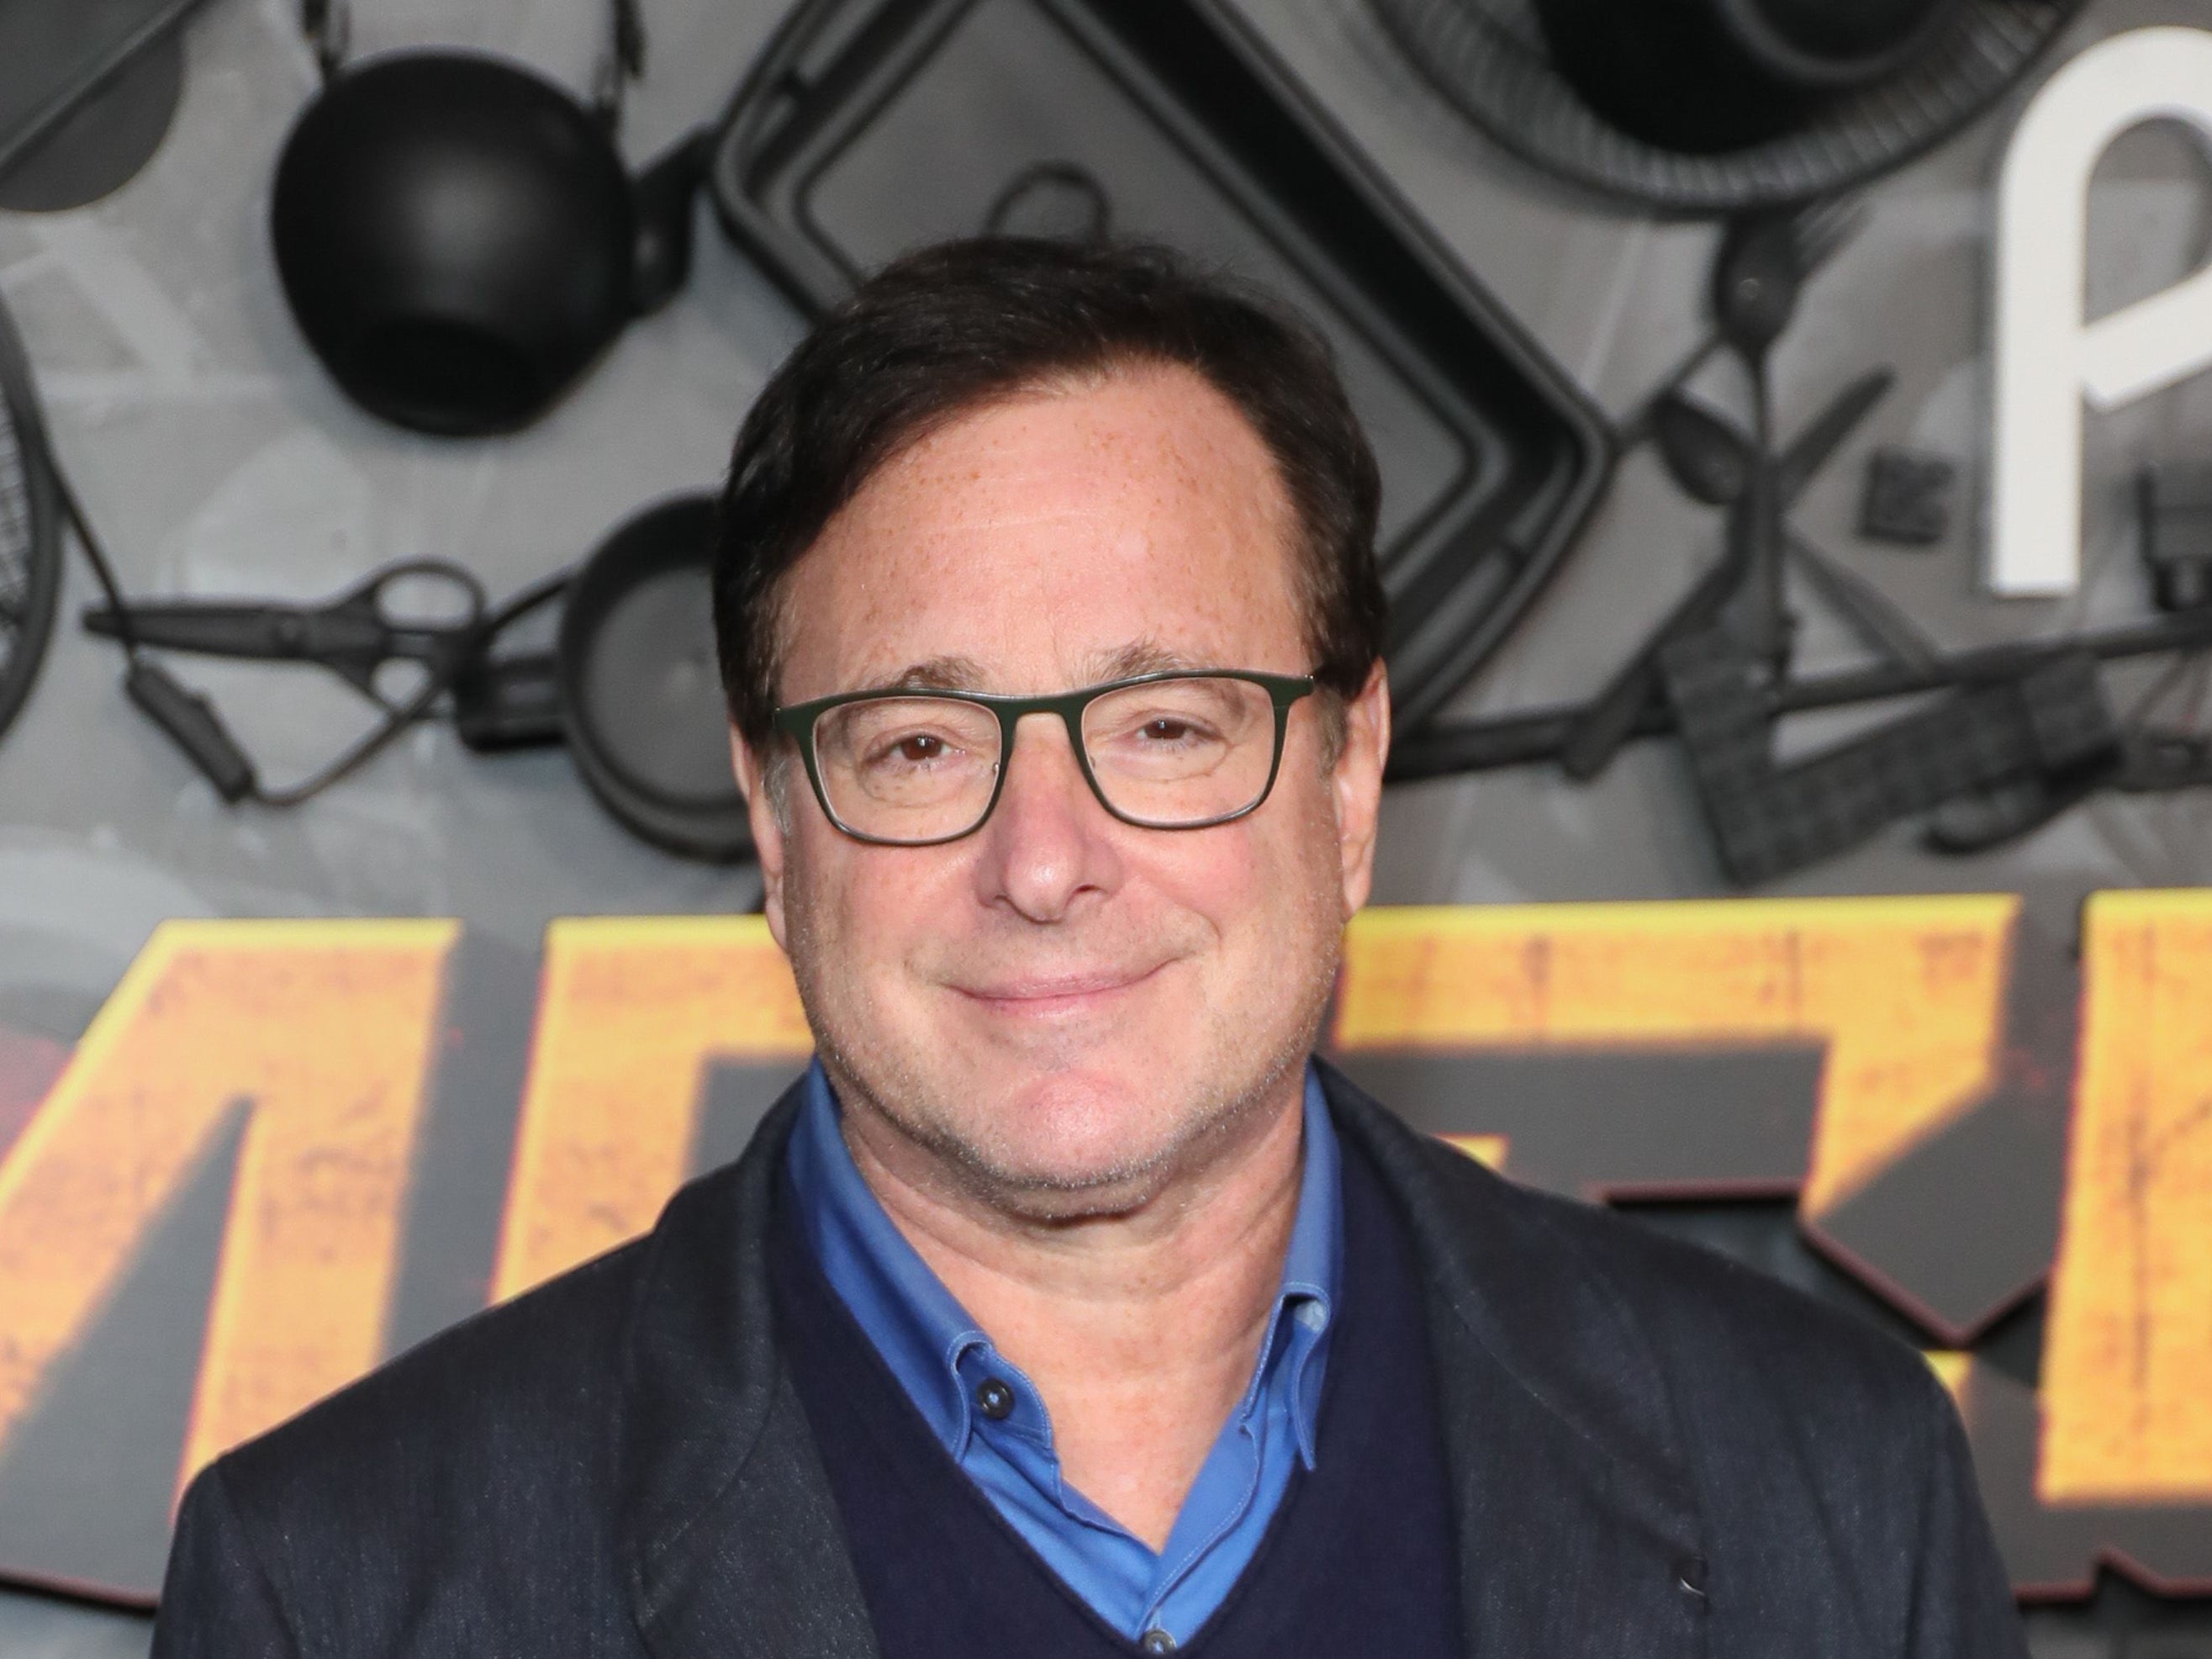 Bob Saget played Danny in hit ABC sitcom ‘Full House’